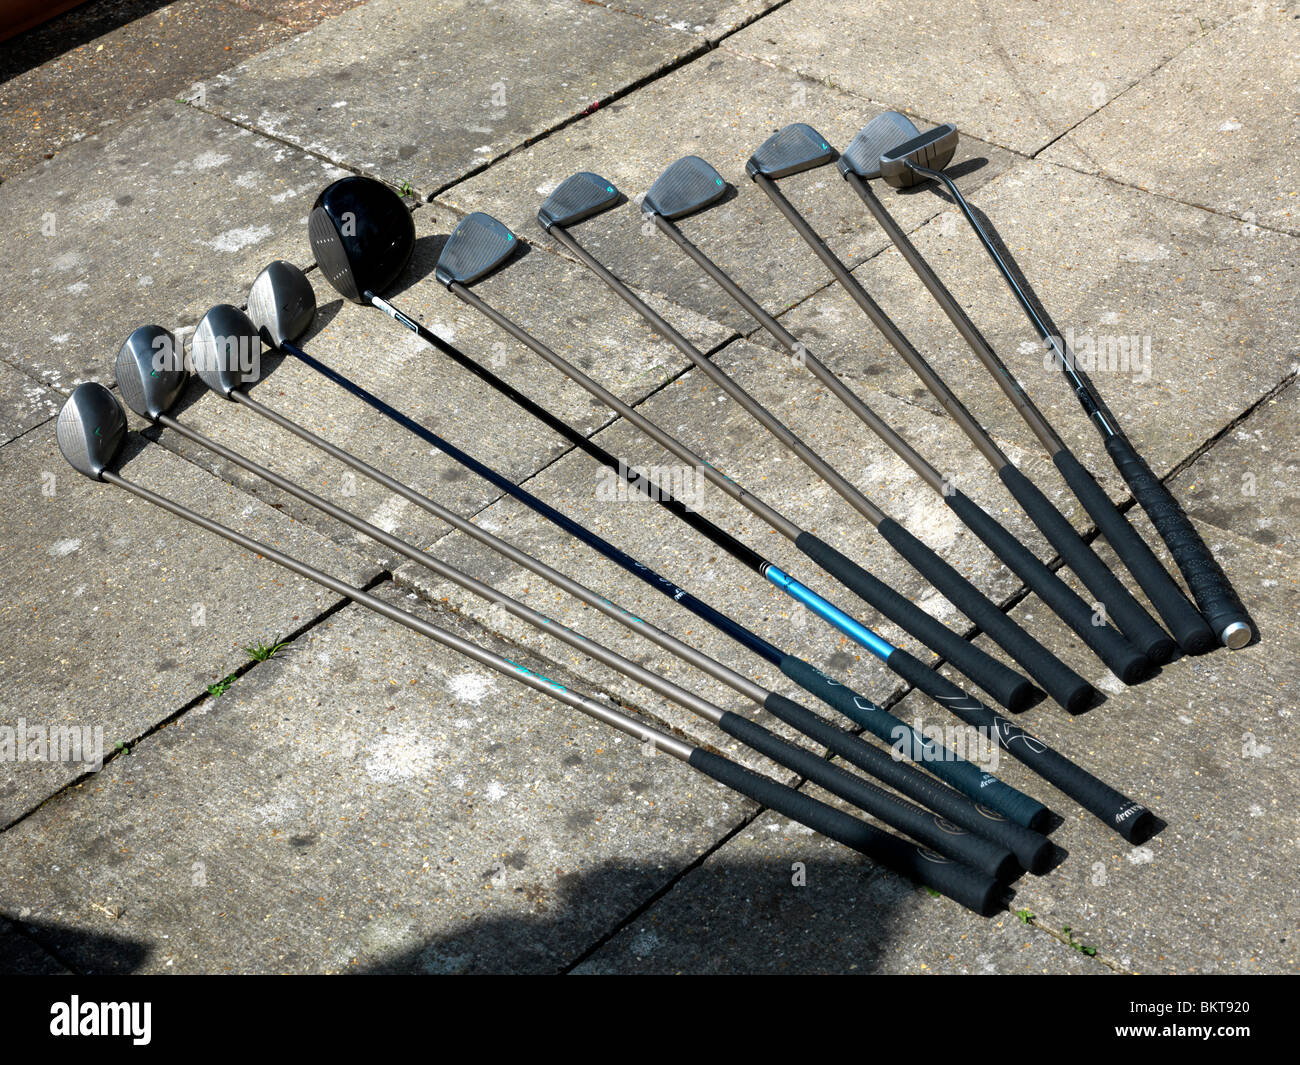 A full set of Golf Clubs Stock Photo